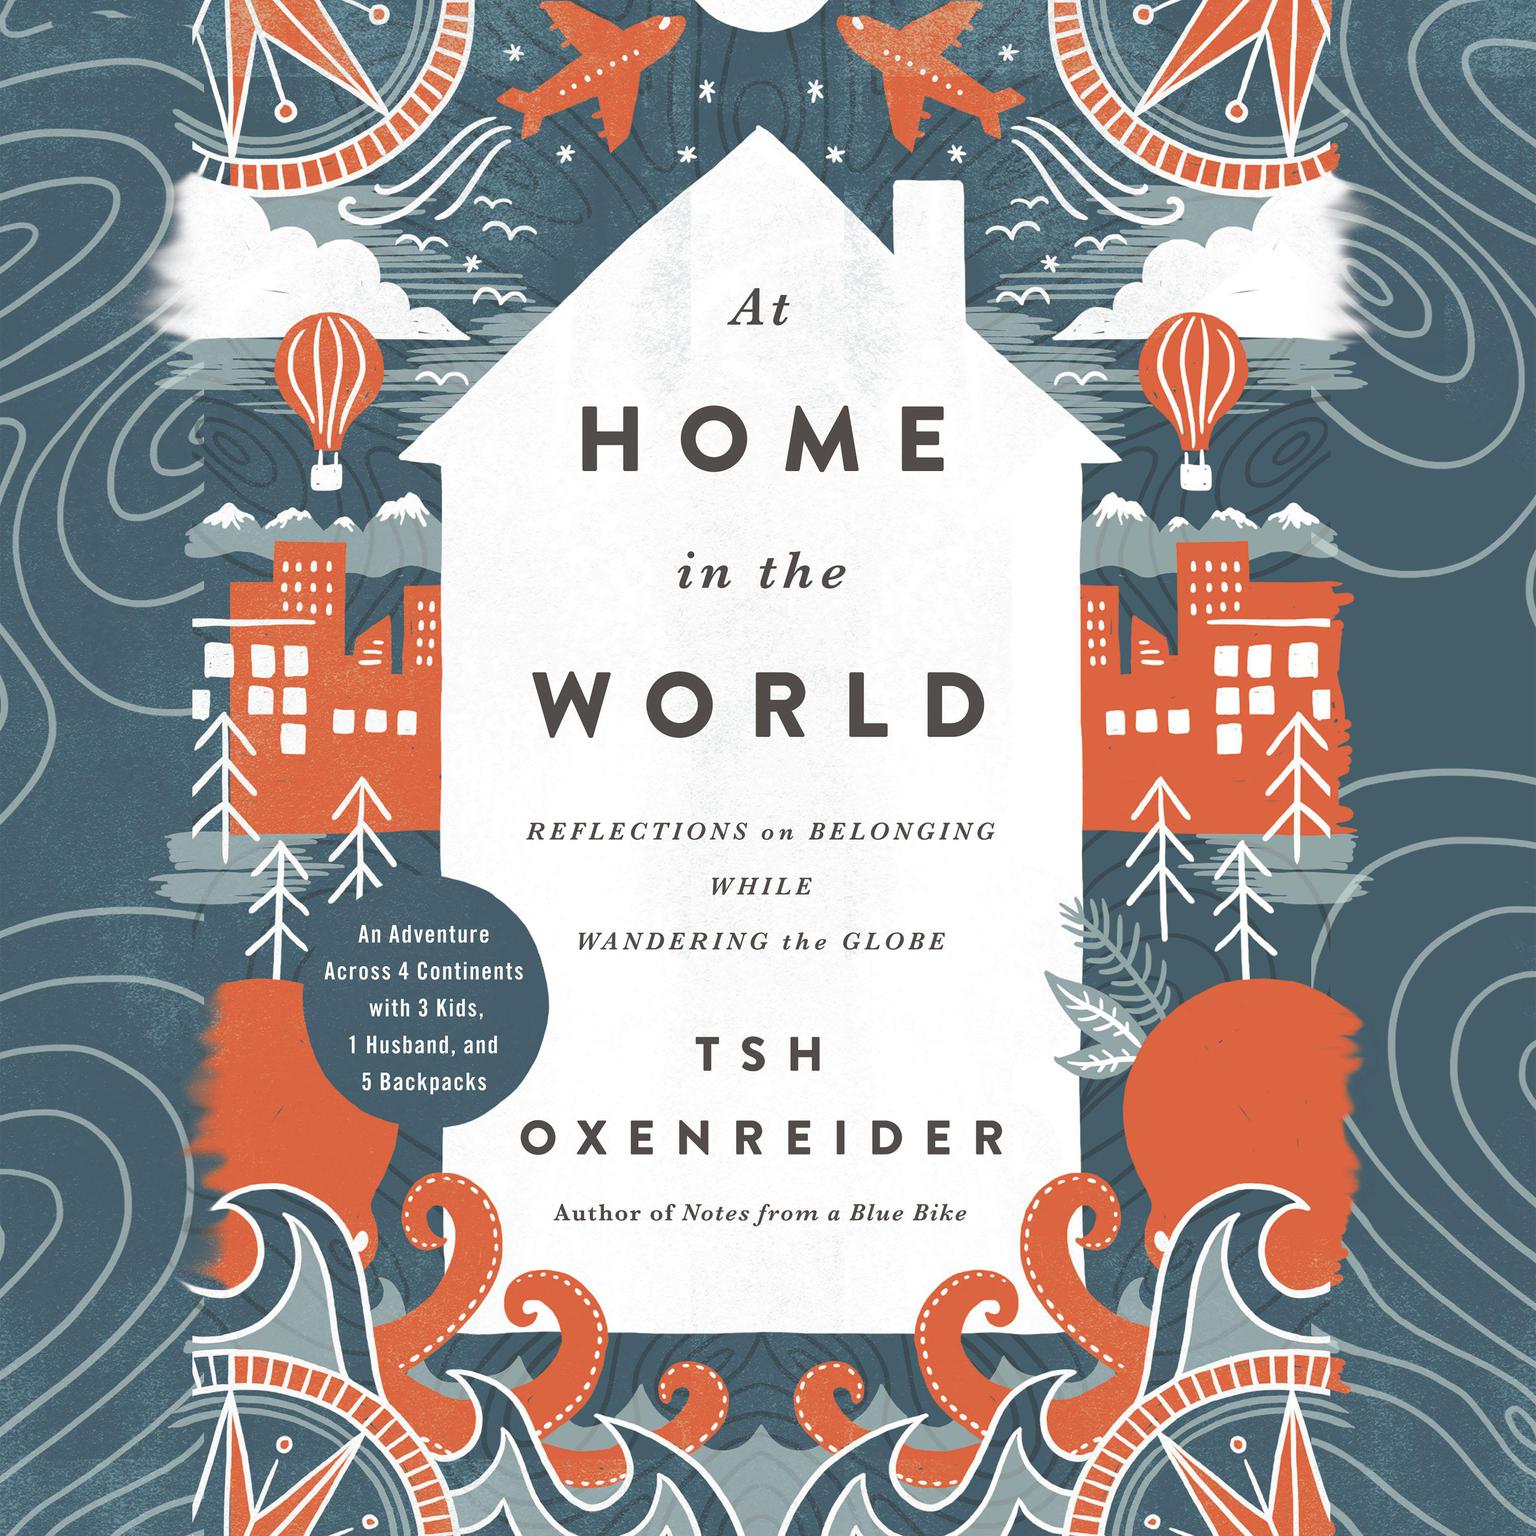 At Home in the World: Reflections on Belonging While Wandering the Globe Audiobook, by Tsh Oxenreider